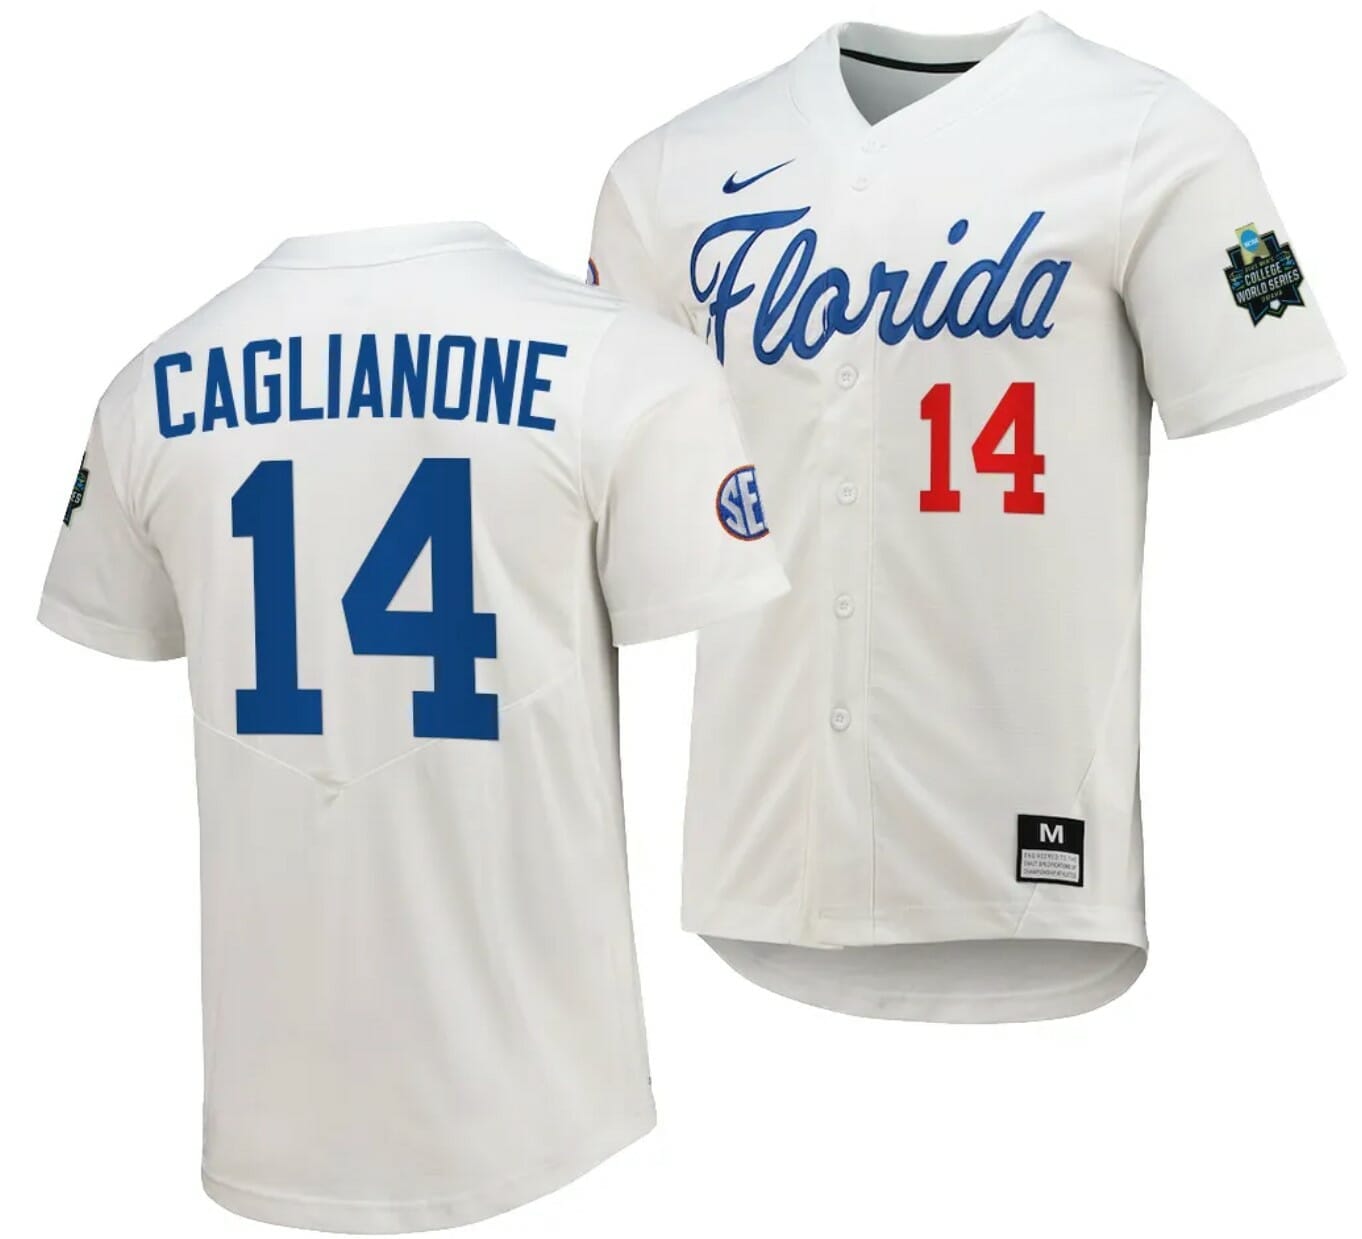 Available] Buy New Jac Caglianone Jersey #14 WS 2023 White